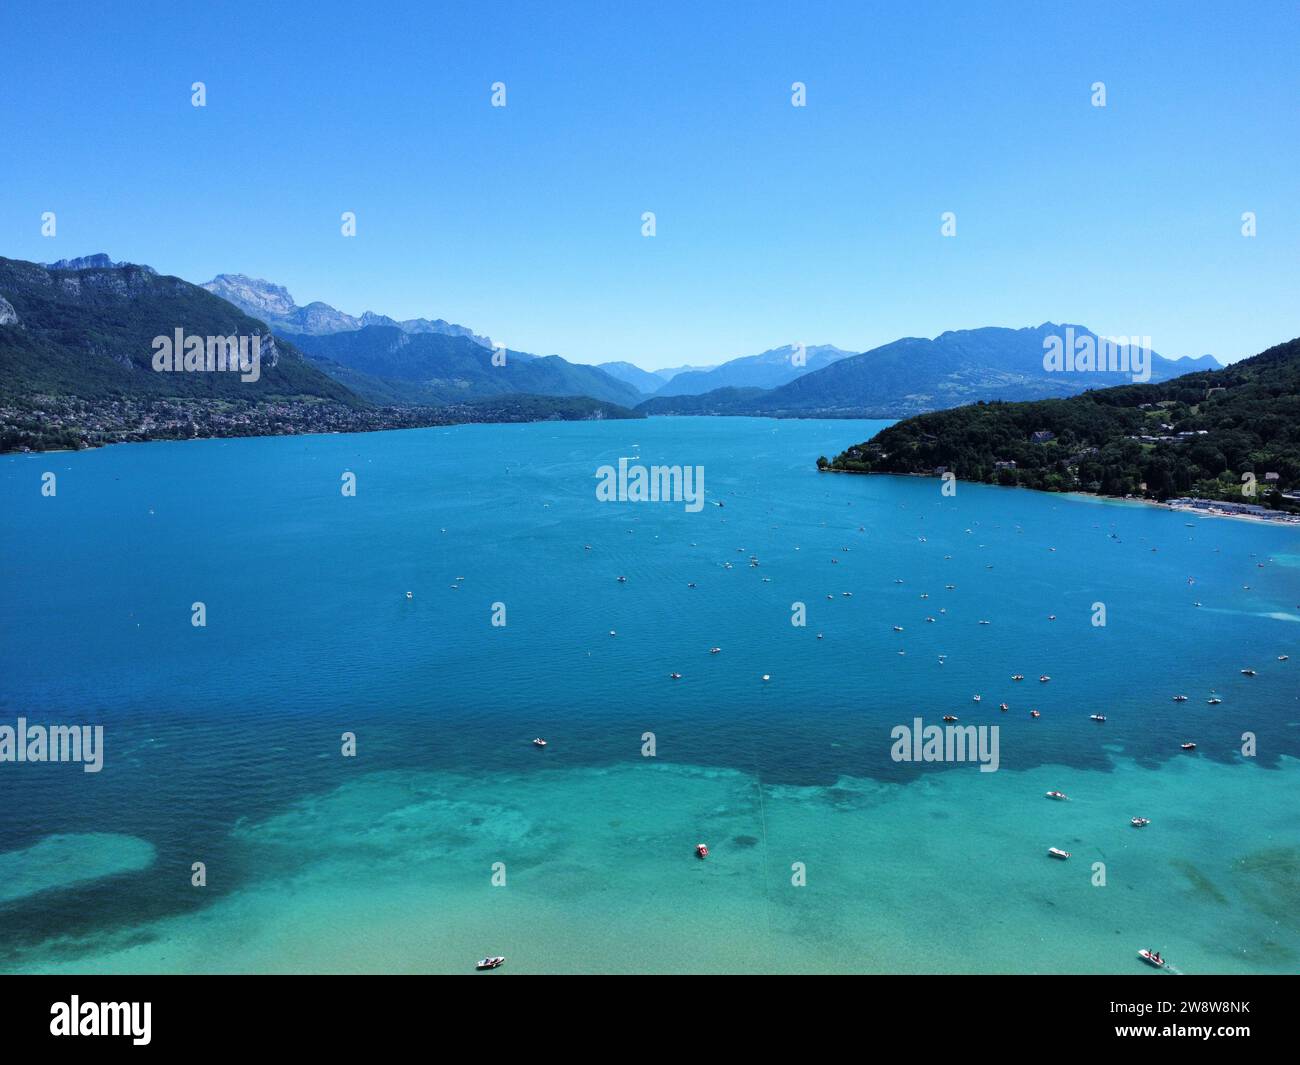 Drone photo Annecy lake, Lac d'Annecy France Europe Stock Photo